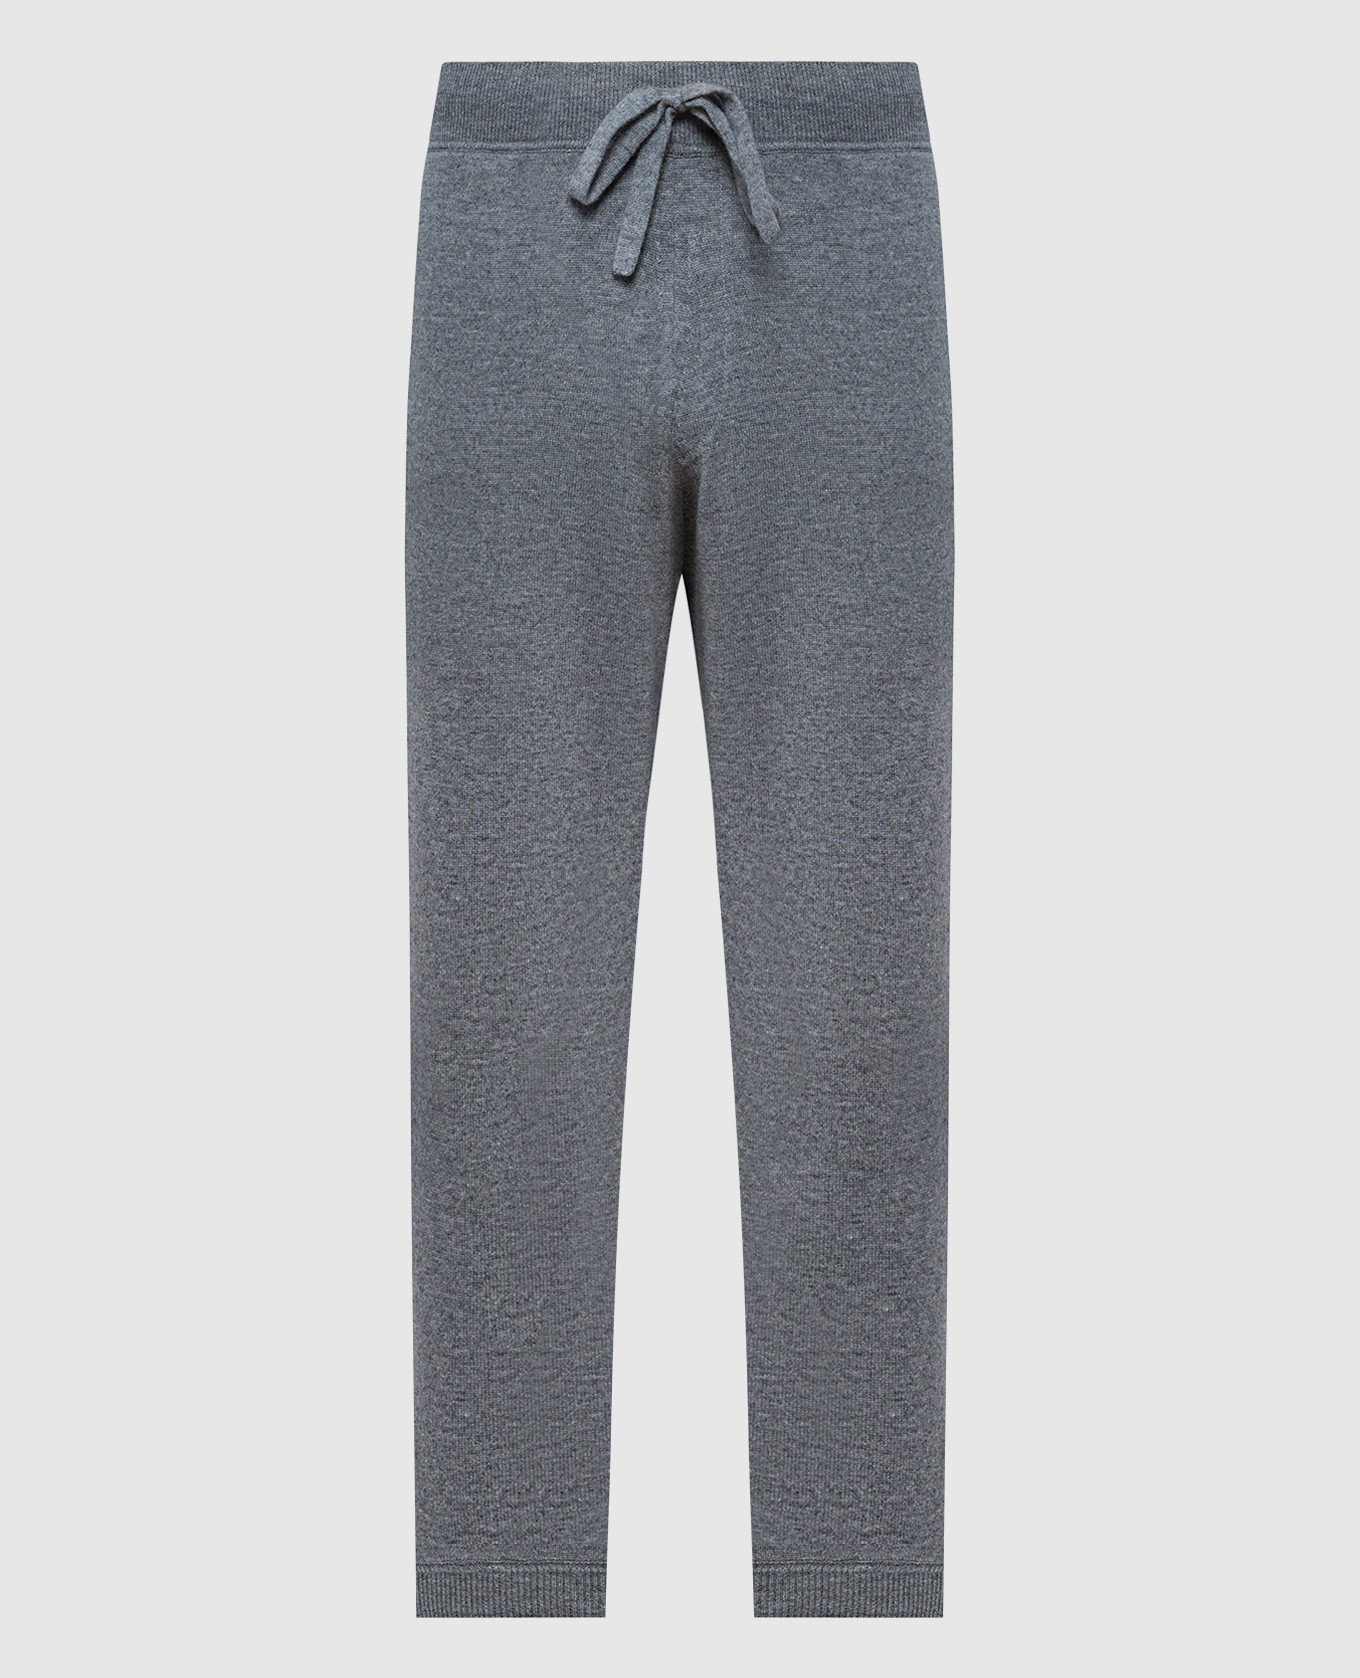 Gray wool and cashmere joggers